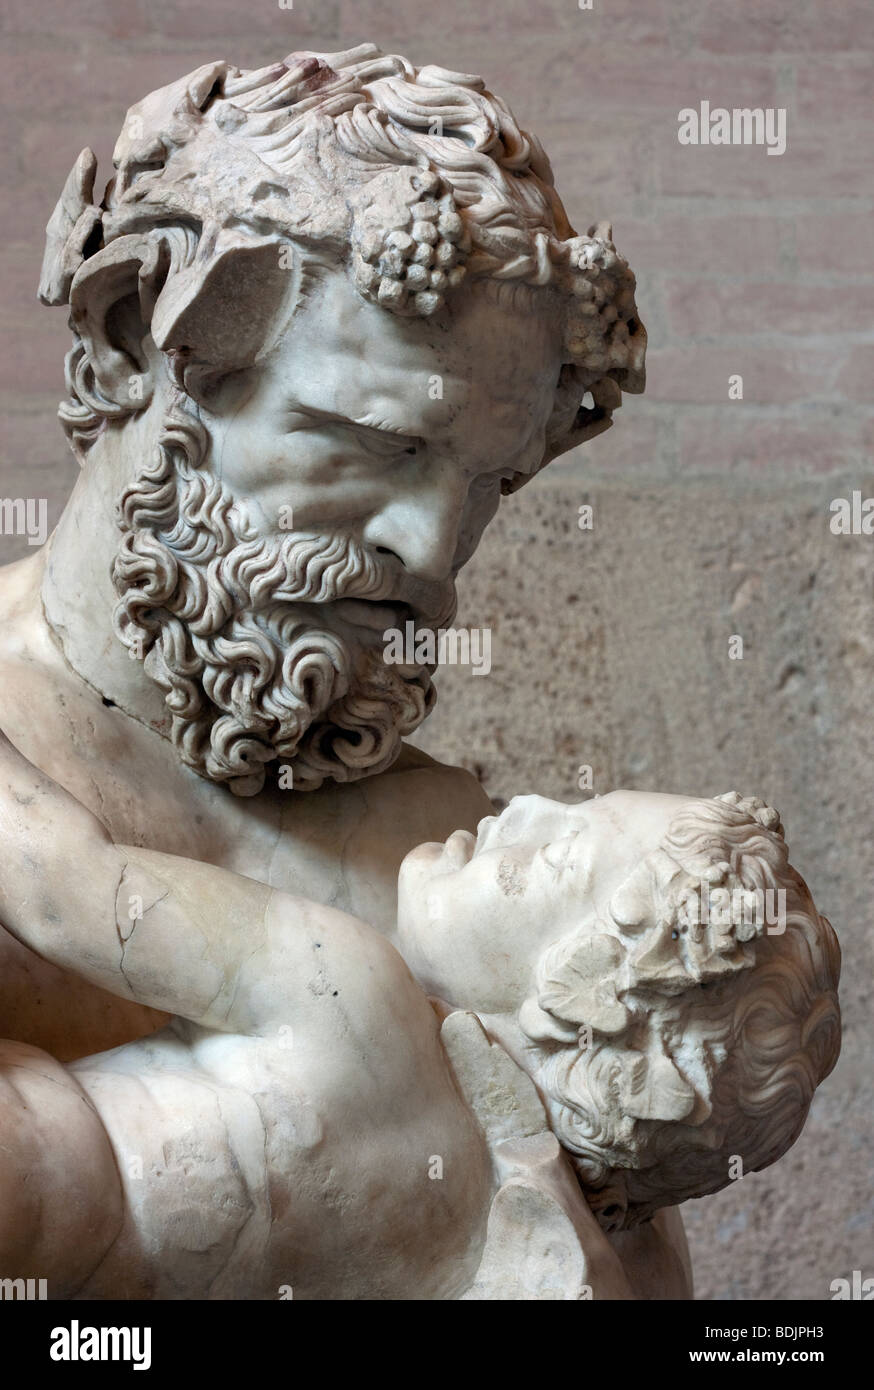 Detail of the Satyr Cradling the Infant Dionysos in the Munich Glyptothek. See description for more info. Stock Photo